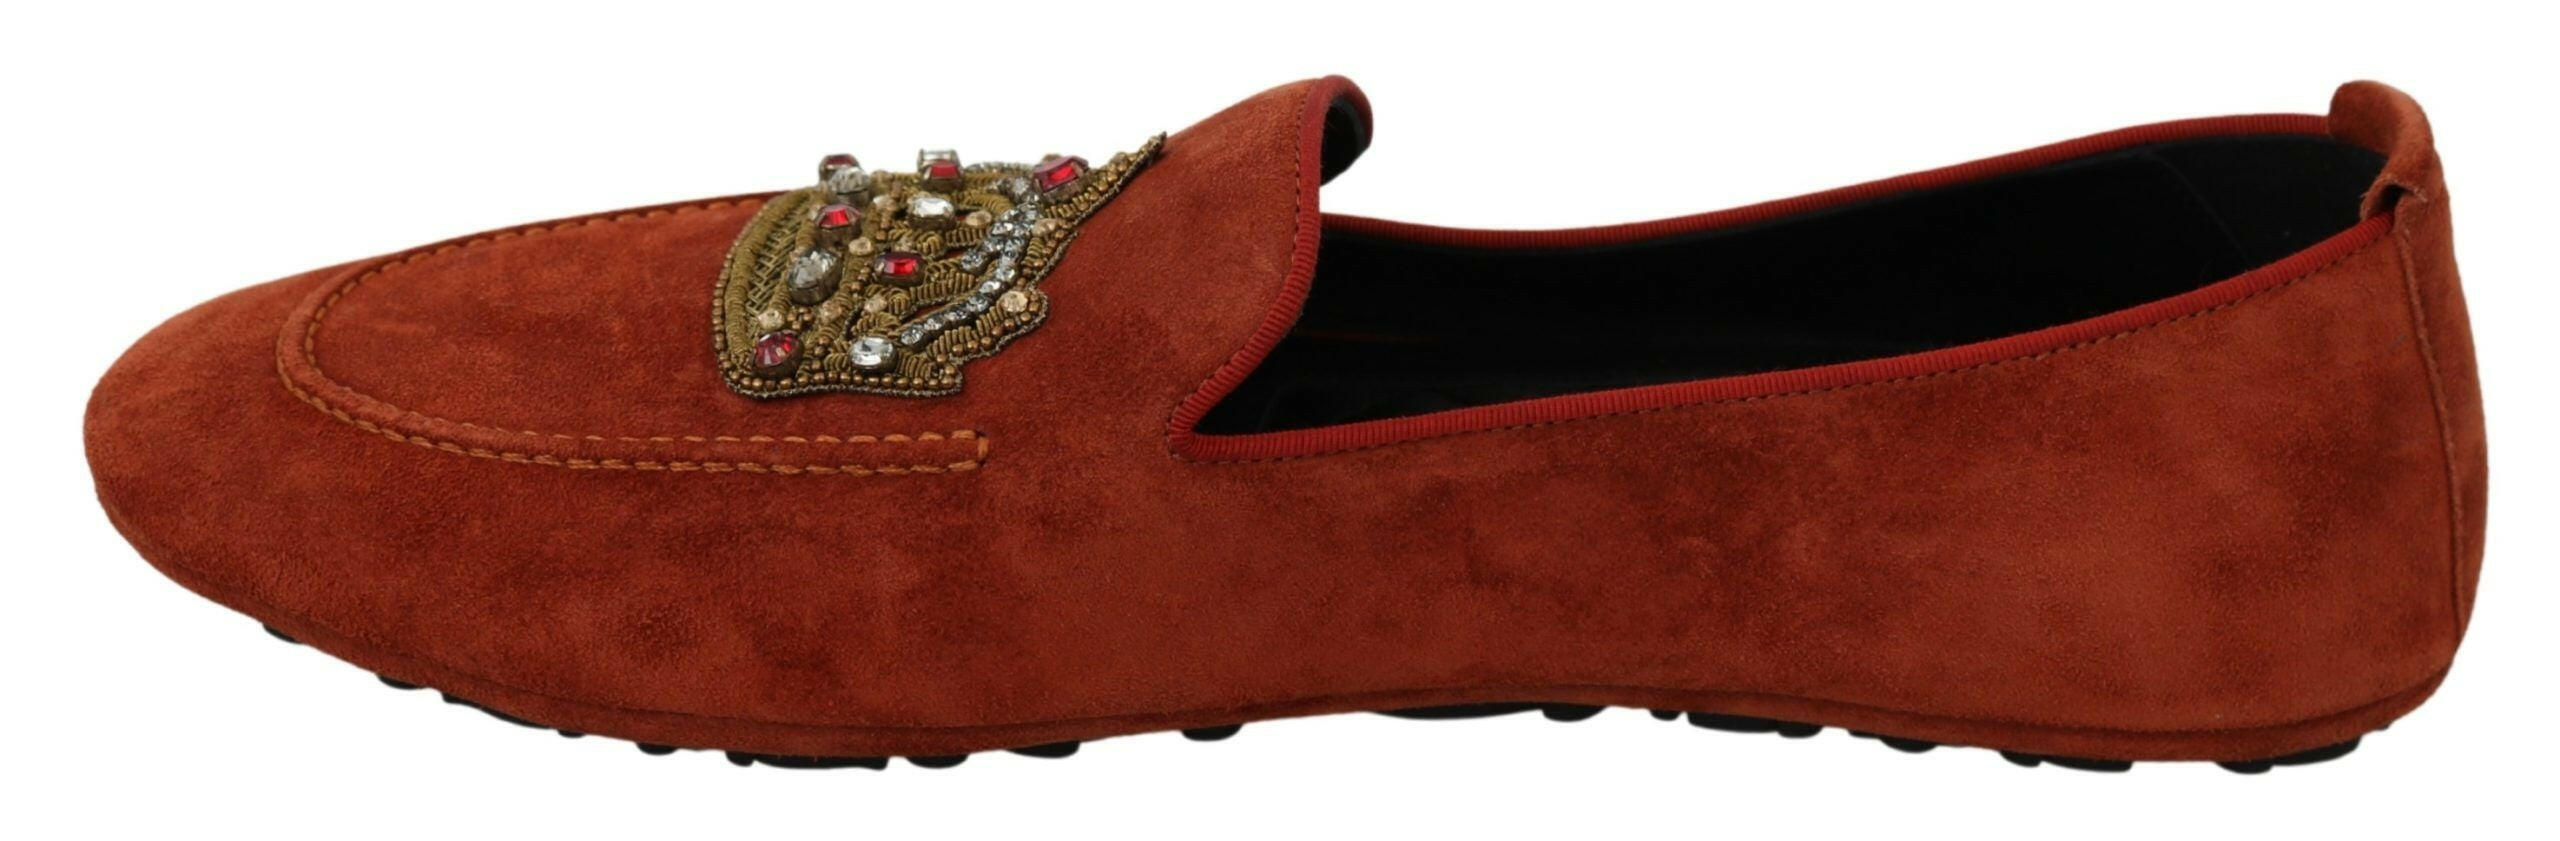 Dolce & Gabbana Orange Leather Moccasins Crystal Crown Slippers Shoes - GENUINE AUTHENTIC BRAND LLC  